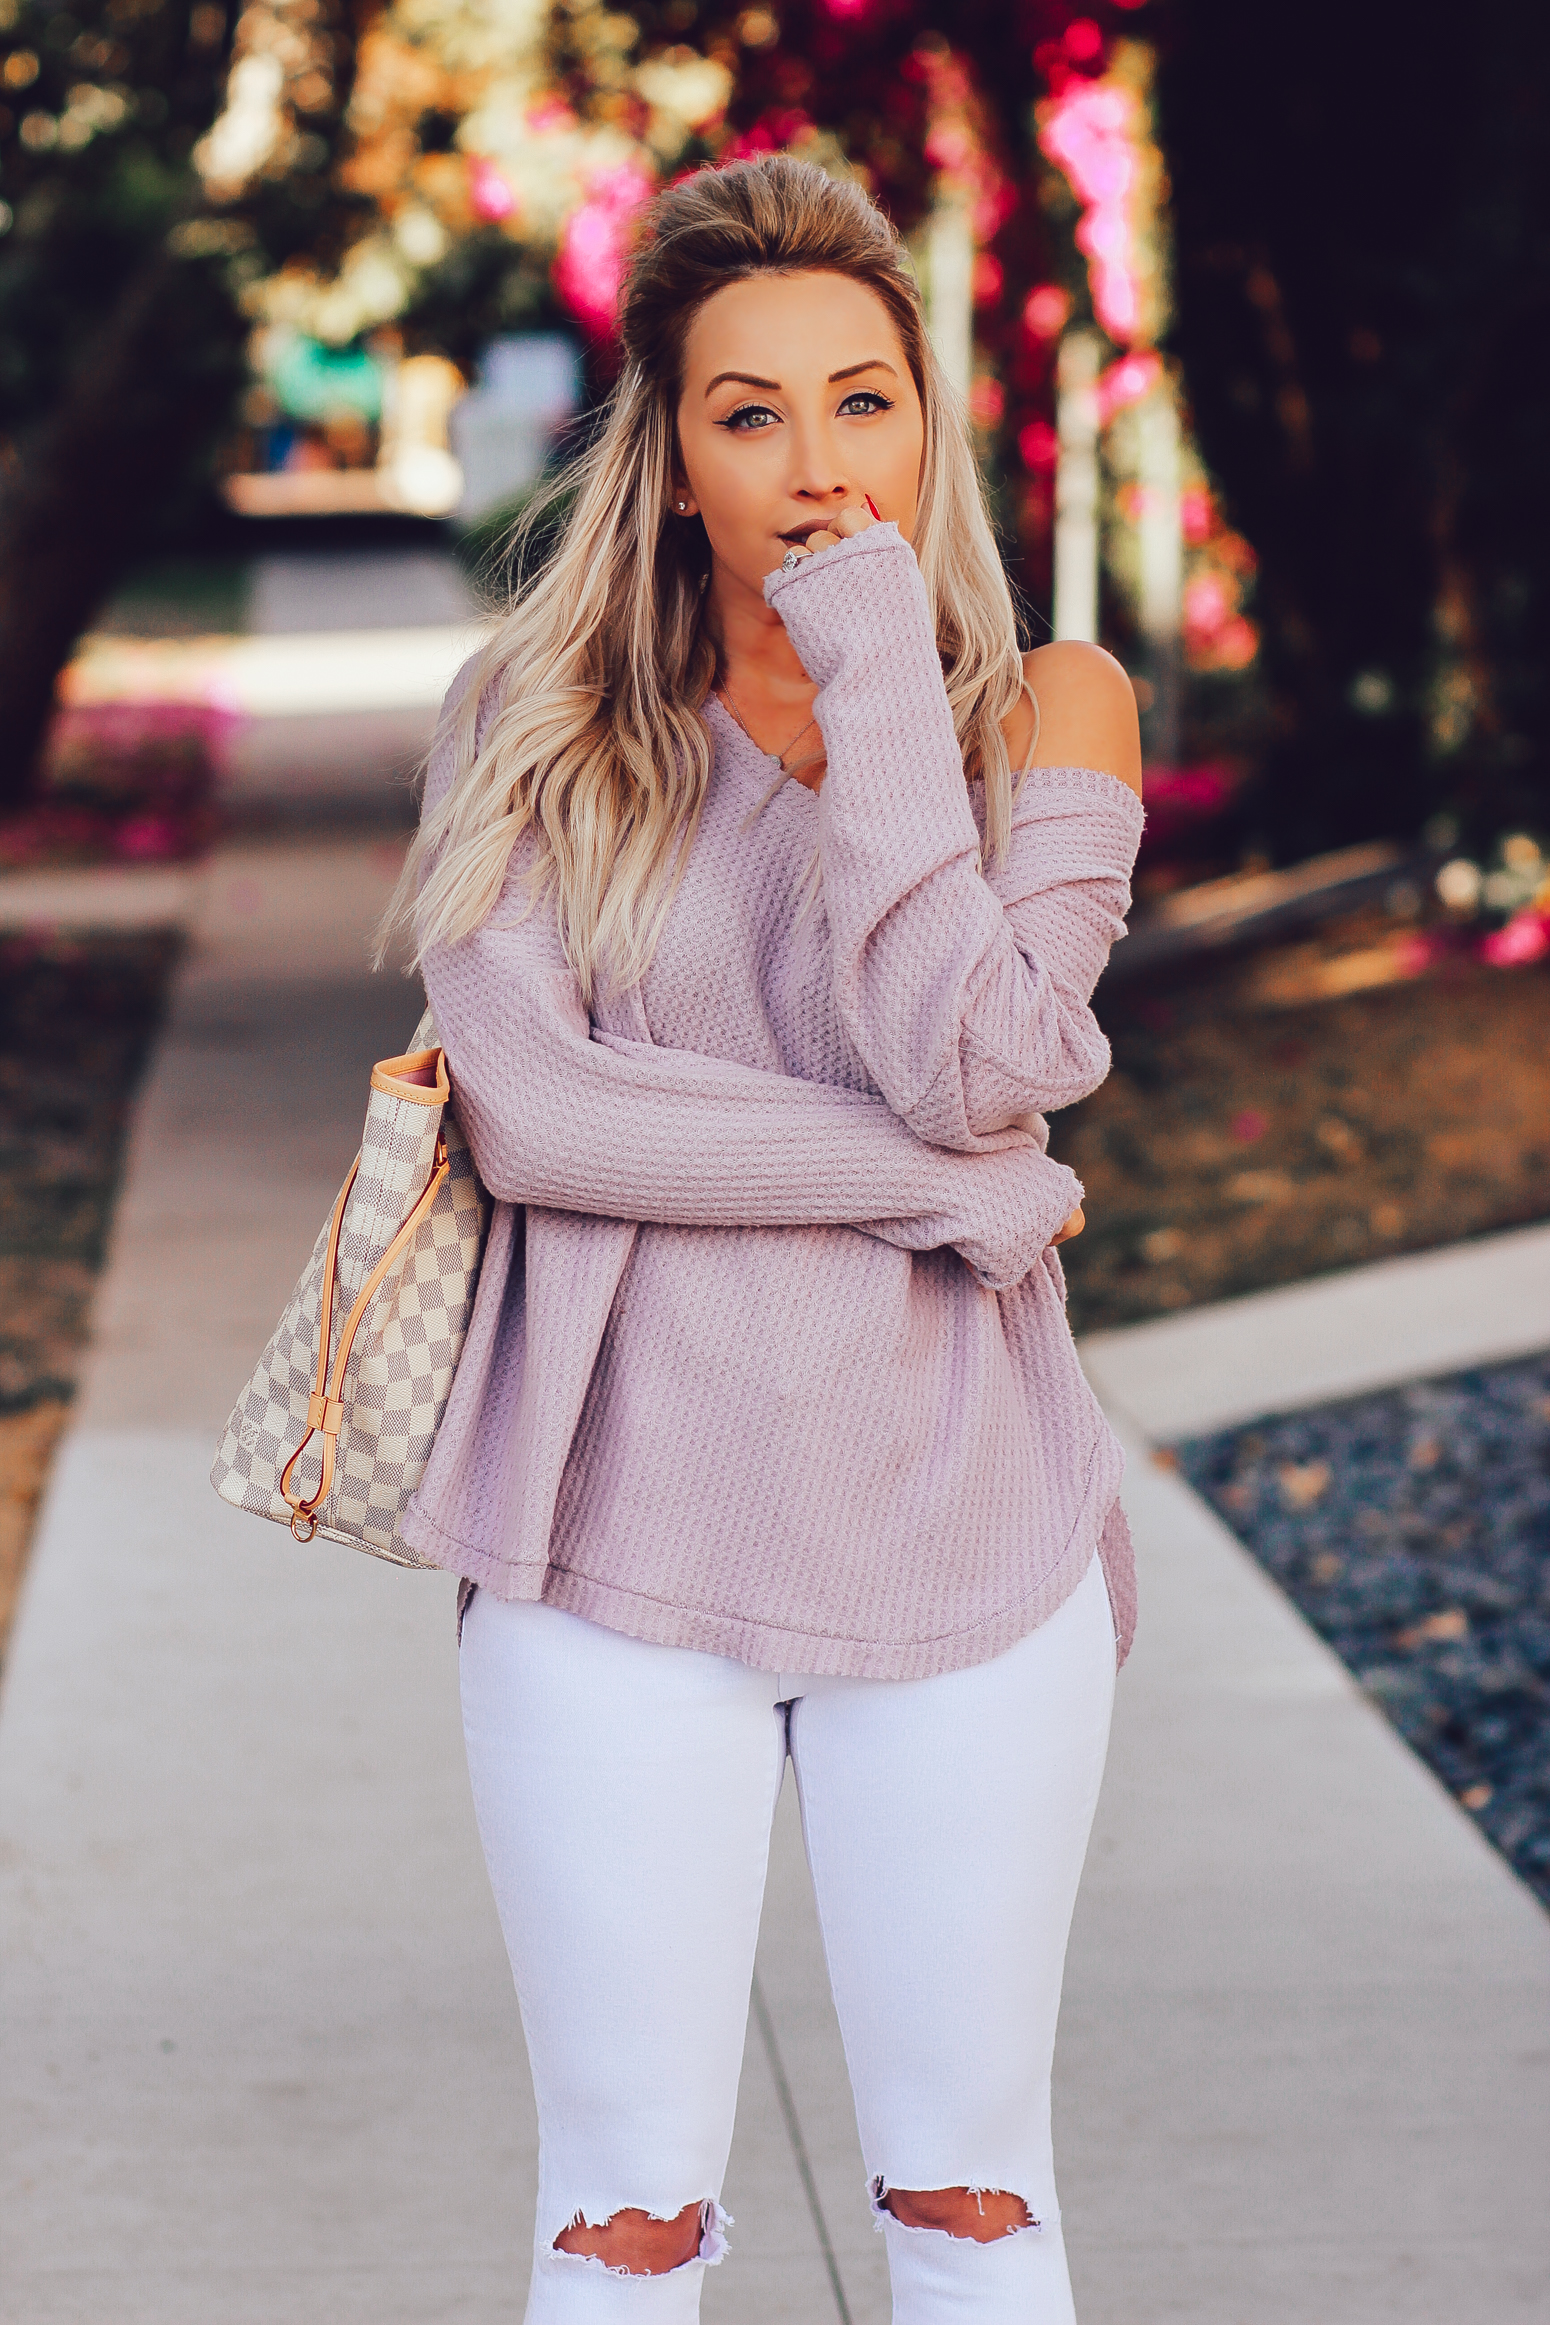 Blondie in the City" Urban Outfitters Violet Sweater | Ripped White Jeans